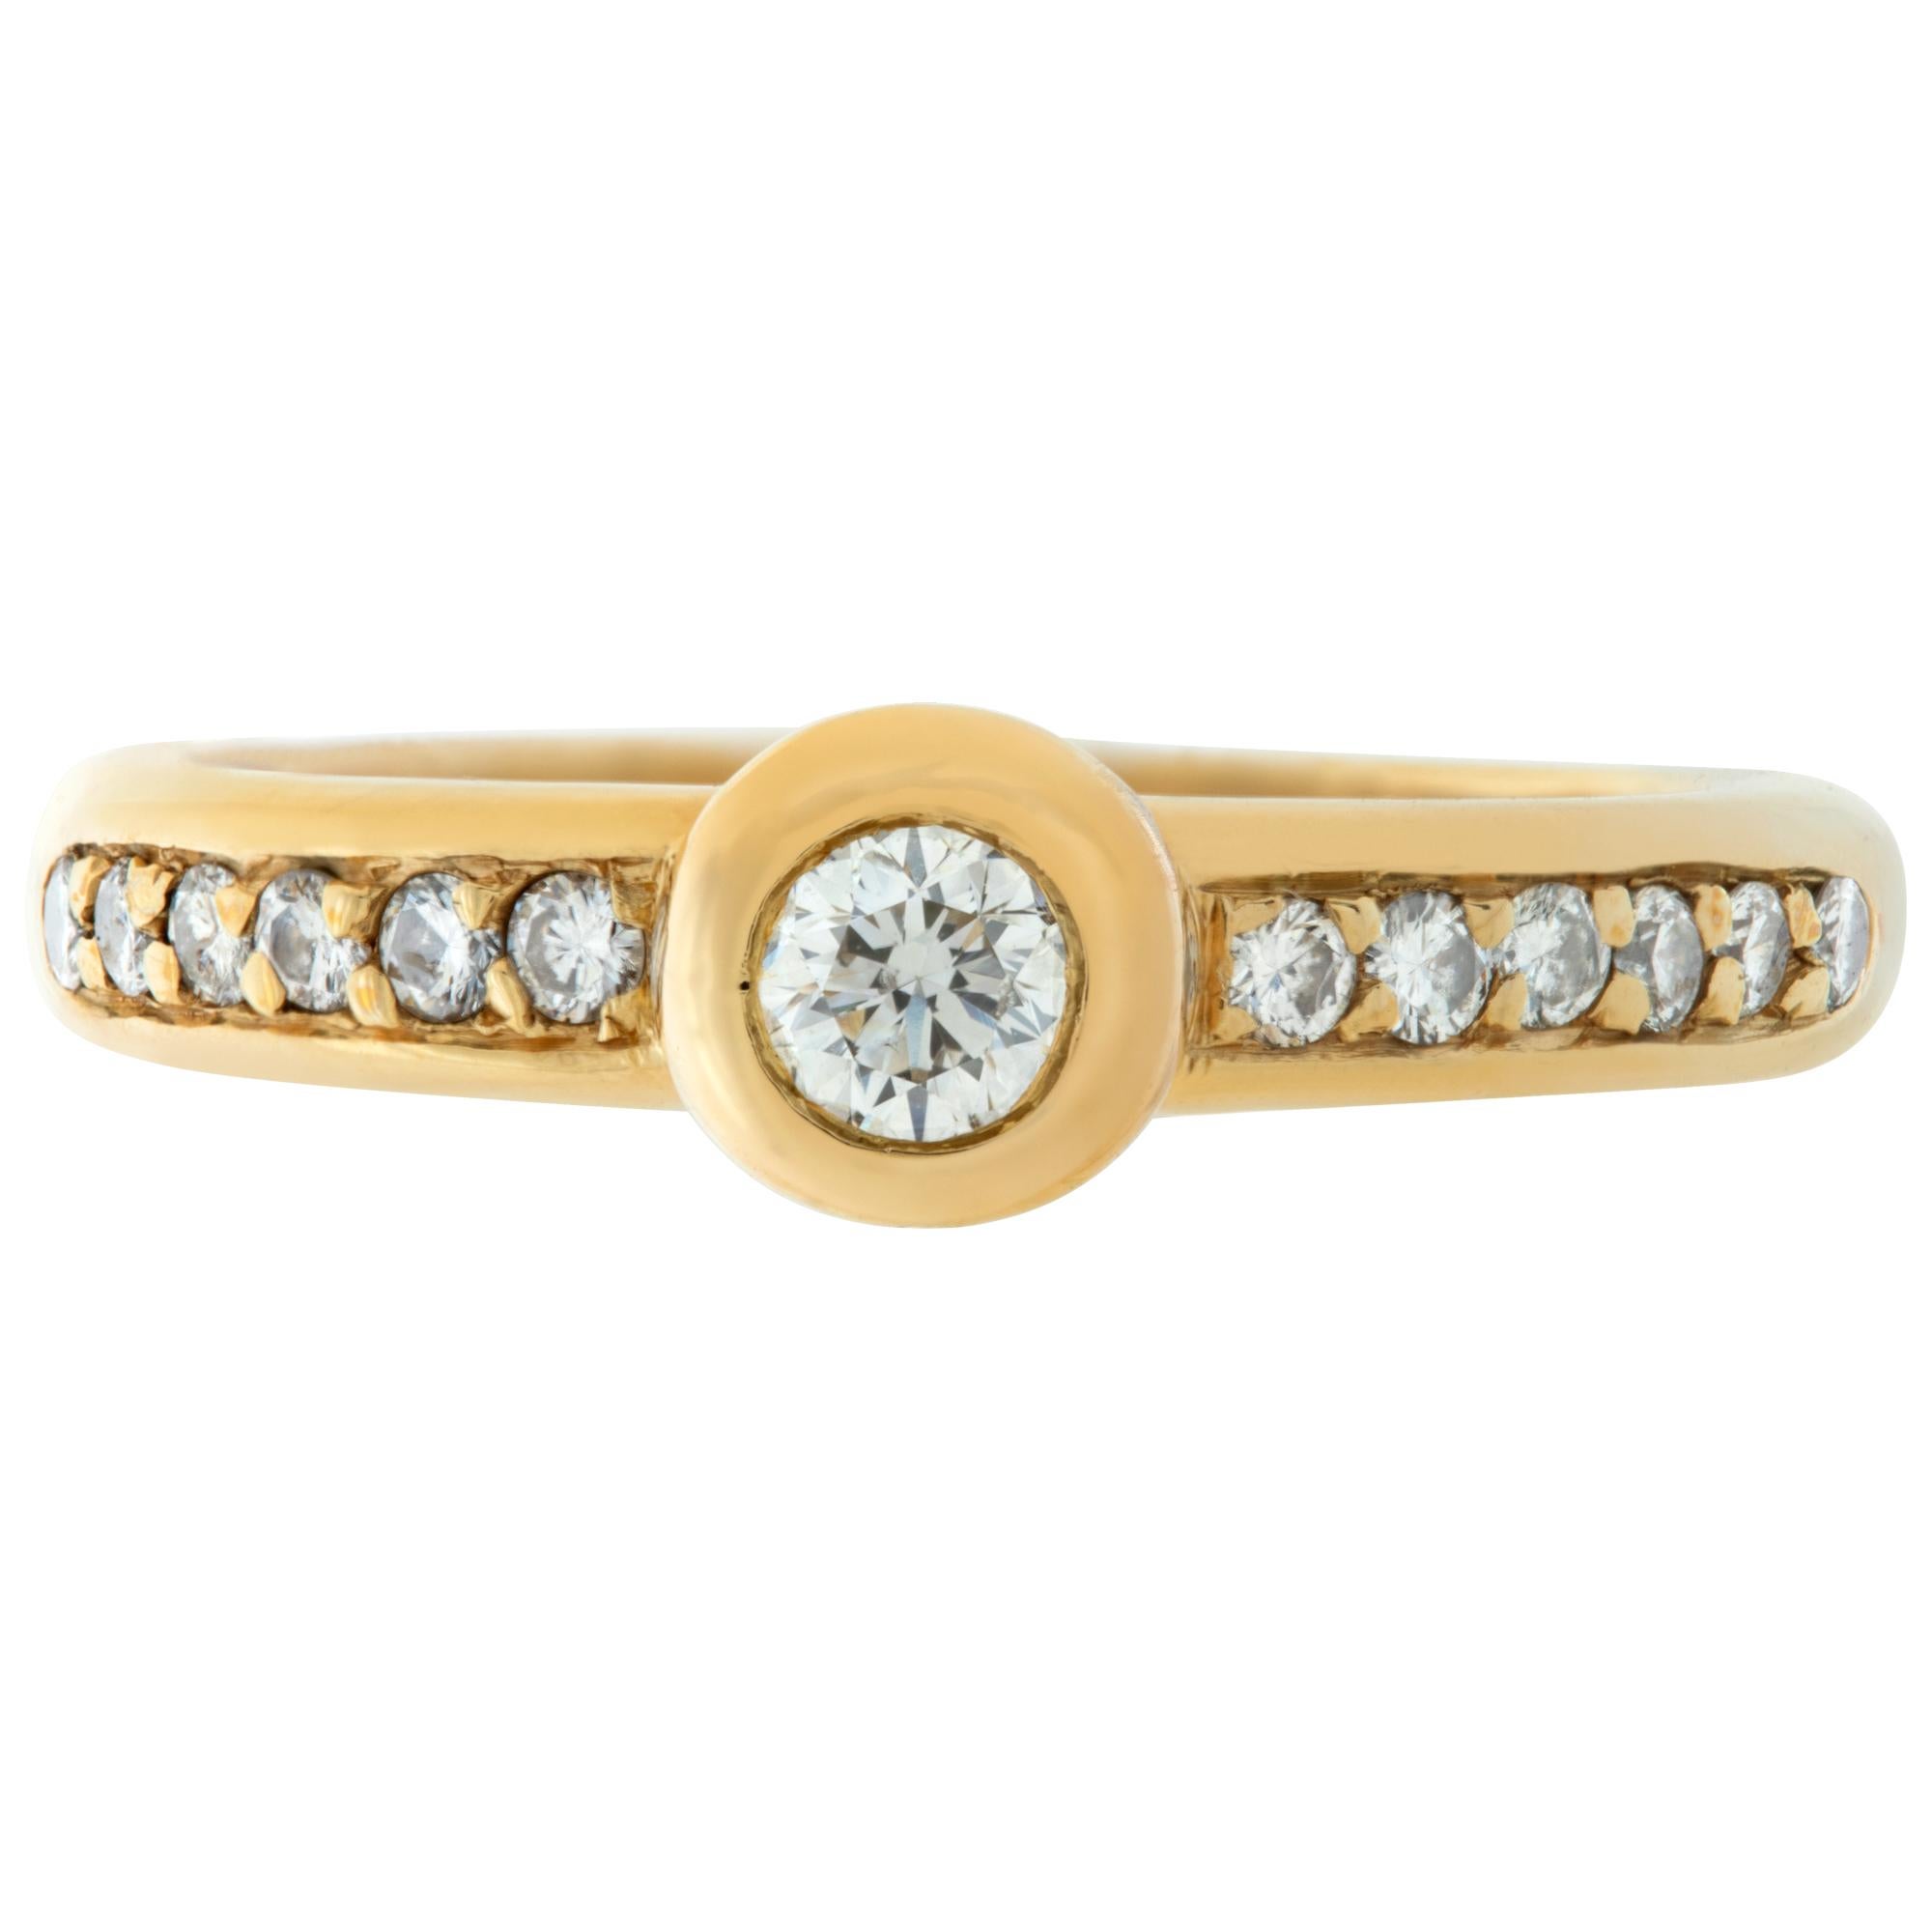 Simple diamond ring center bezel set diamond with side diamond accents total weight approximately 0.50 carat all in 18k yellow gold. Size 5, width 3mm.This Diamond ring is currently size 5 and some items can be sized up or down, please ask! It